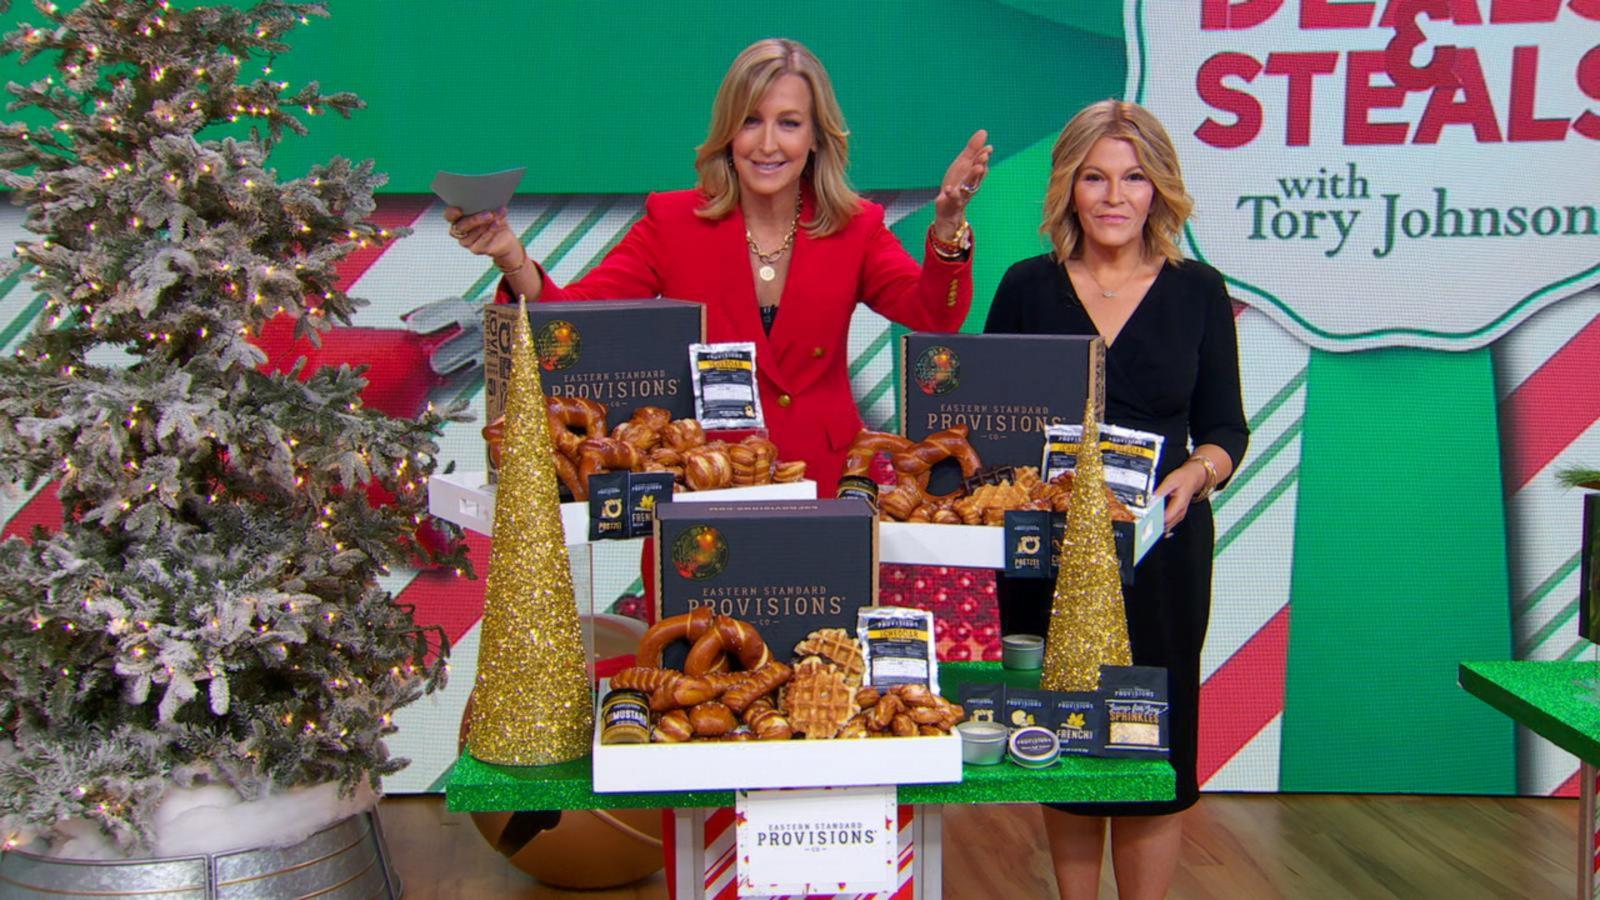 offering free holiday shipping to everyone - Good Morning America